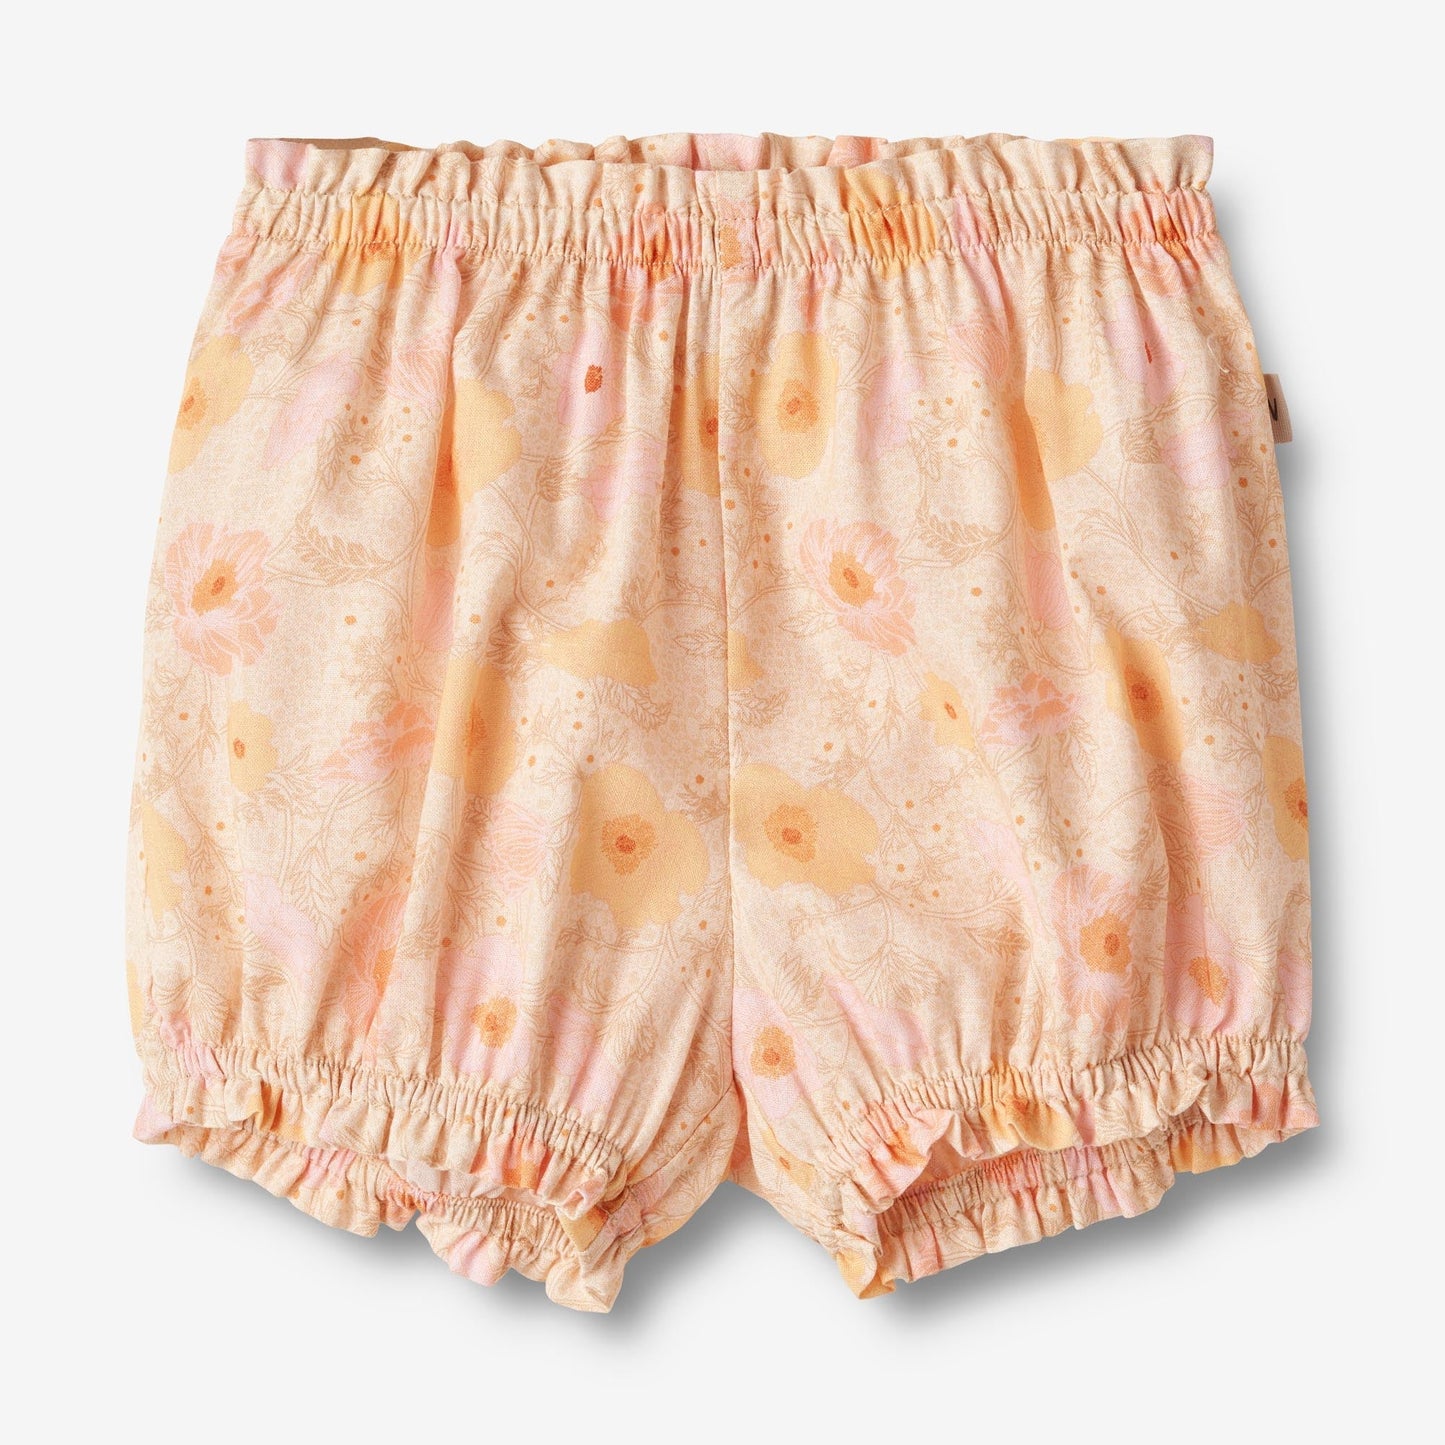 Wheat 'Angie' Baby Nappy Pants - Alabaster Flower Bobbles